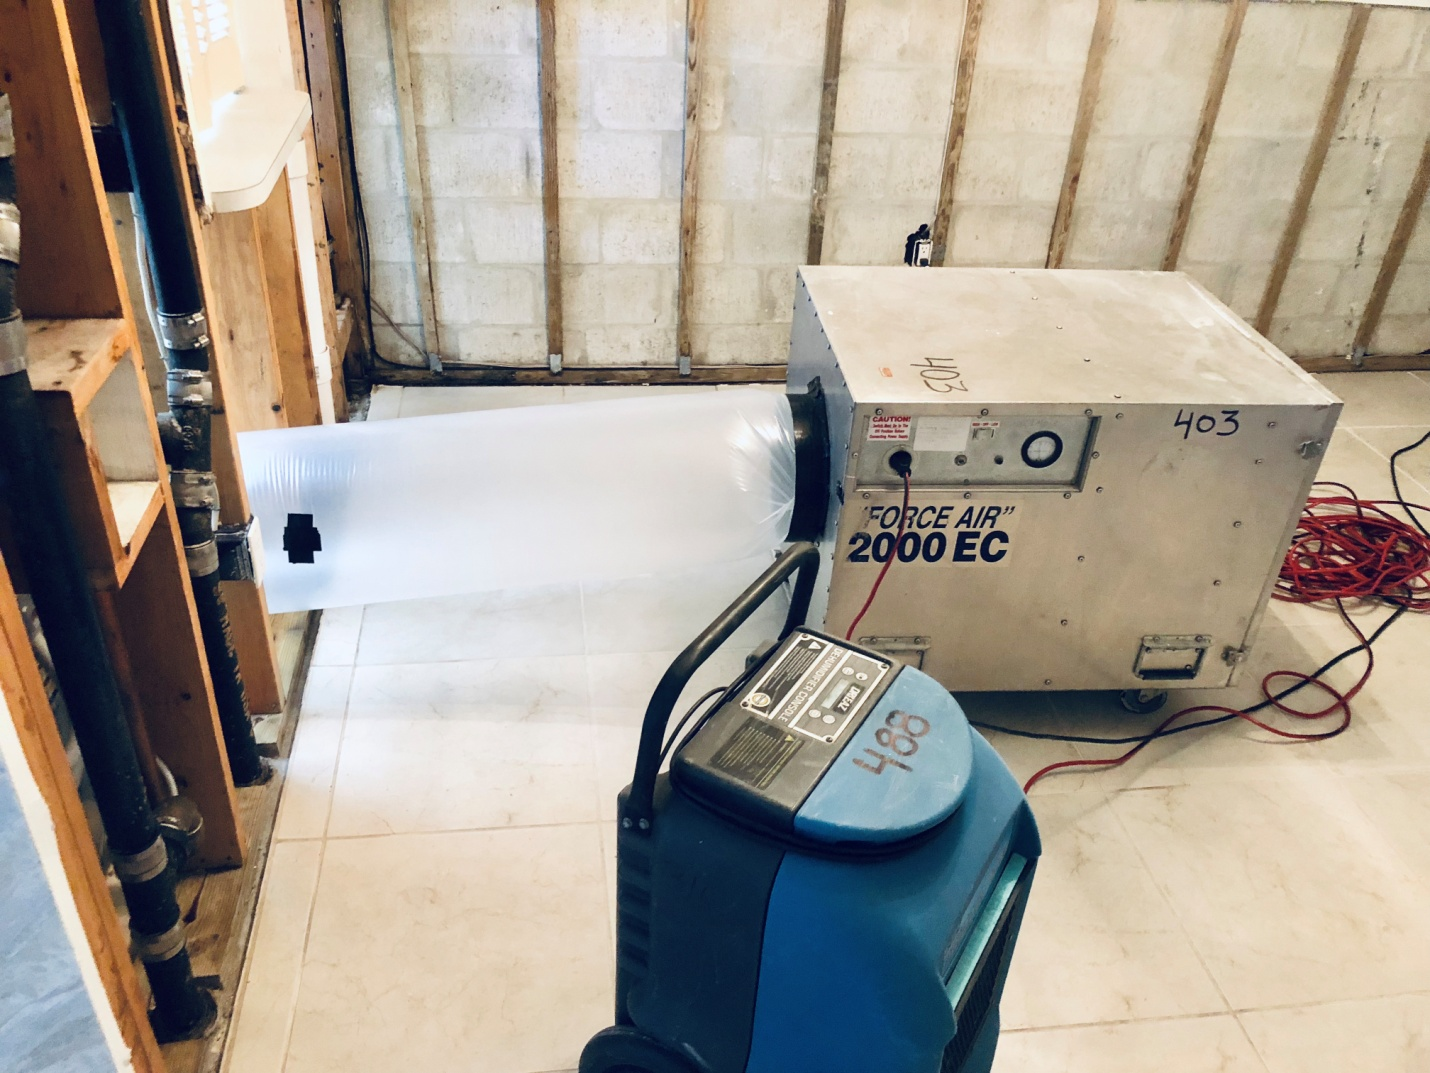 Equipment dehumidifying a house after water damage